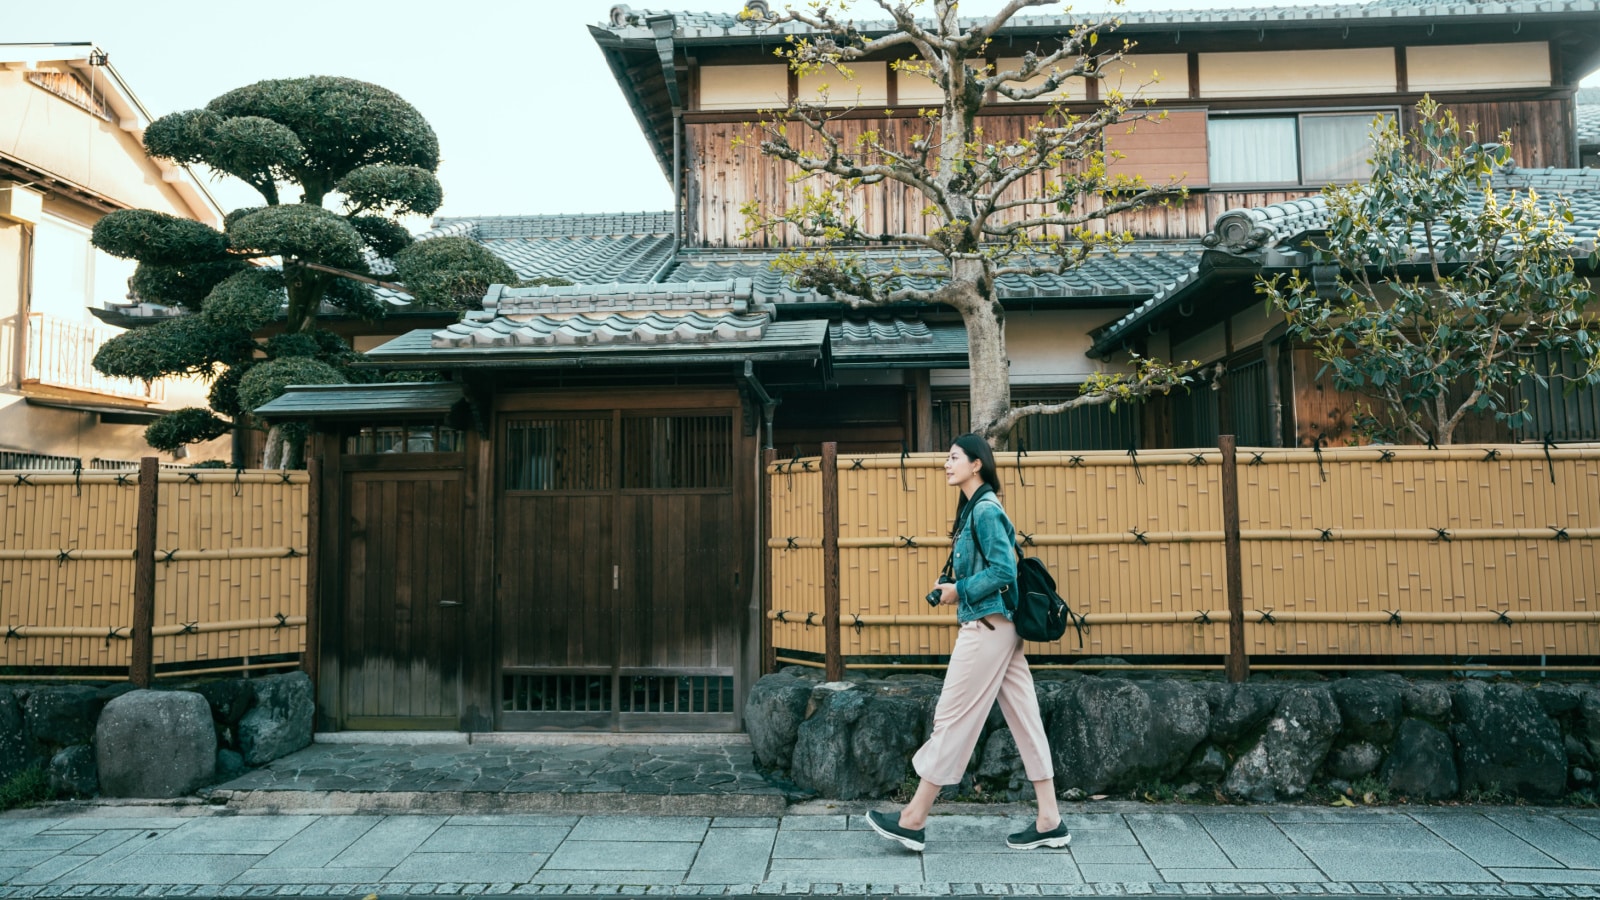 full length of young girl travel photographer walking along the bamboo walls of japanese style wooden house with trees and graden inside. woman backpacker on street road in town city kyoto japan.